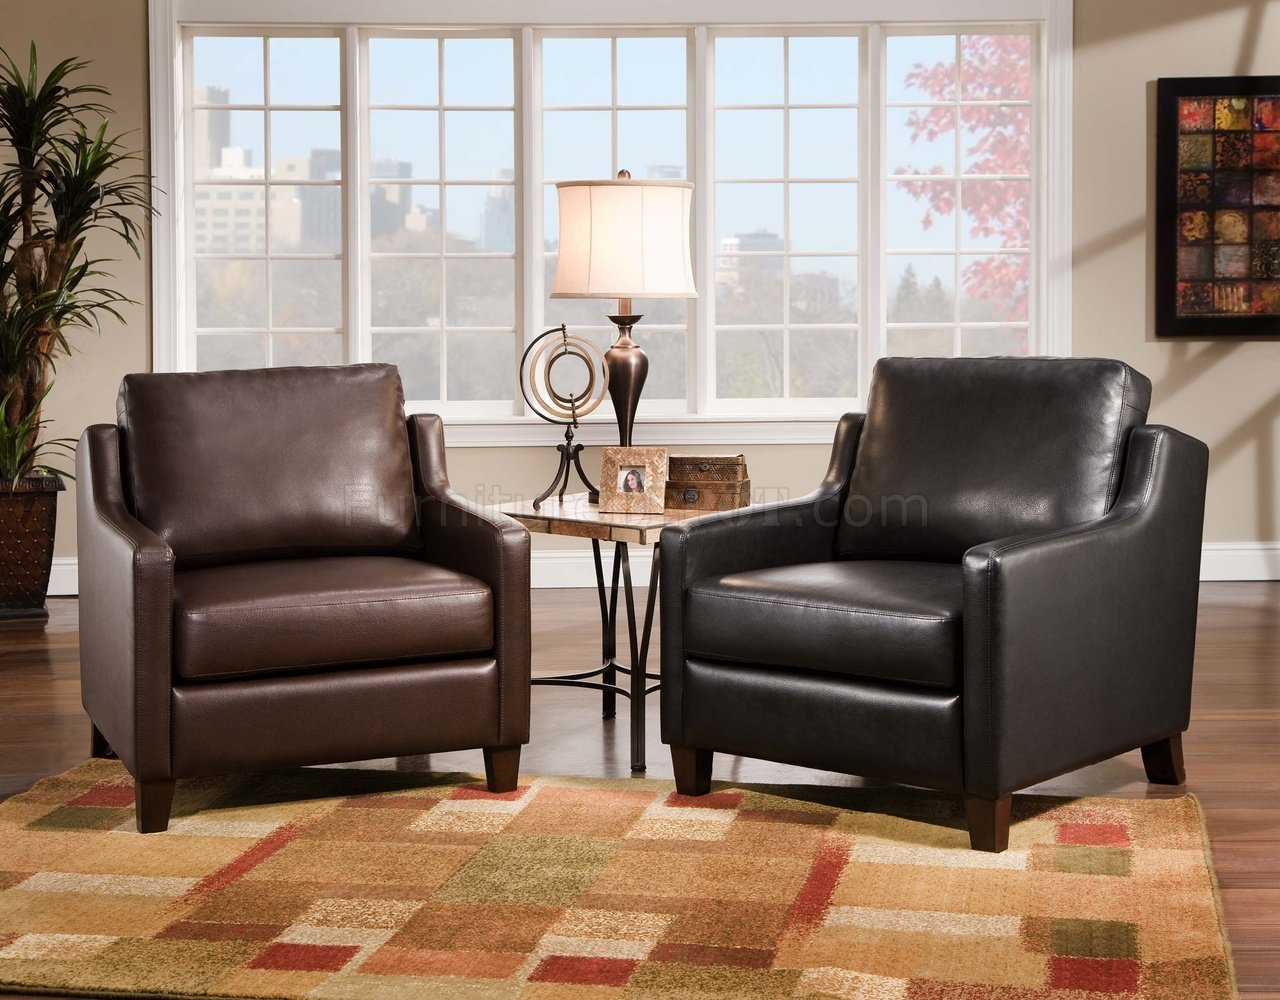 Black or Brown Bonded Leather Modern Accent Chair